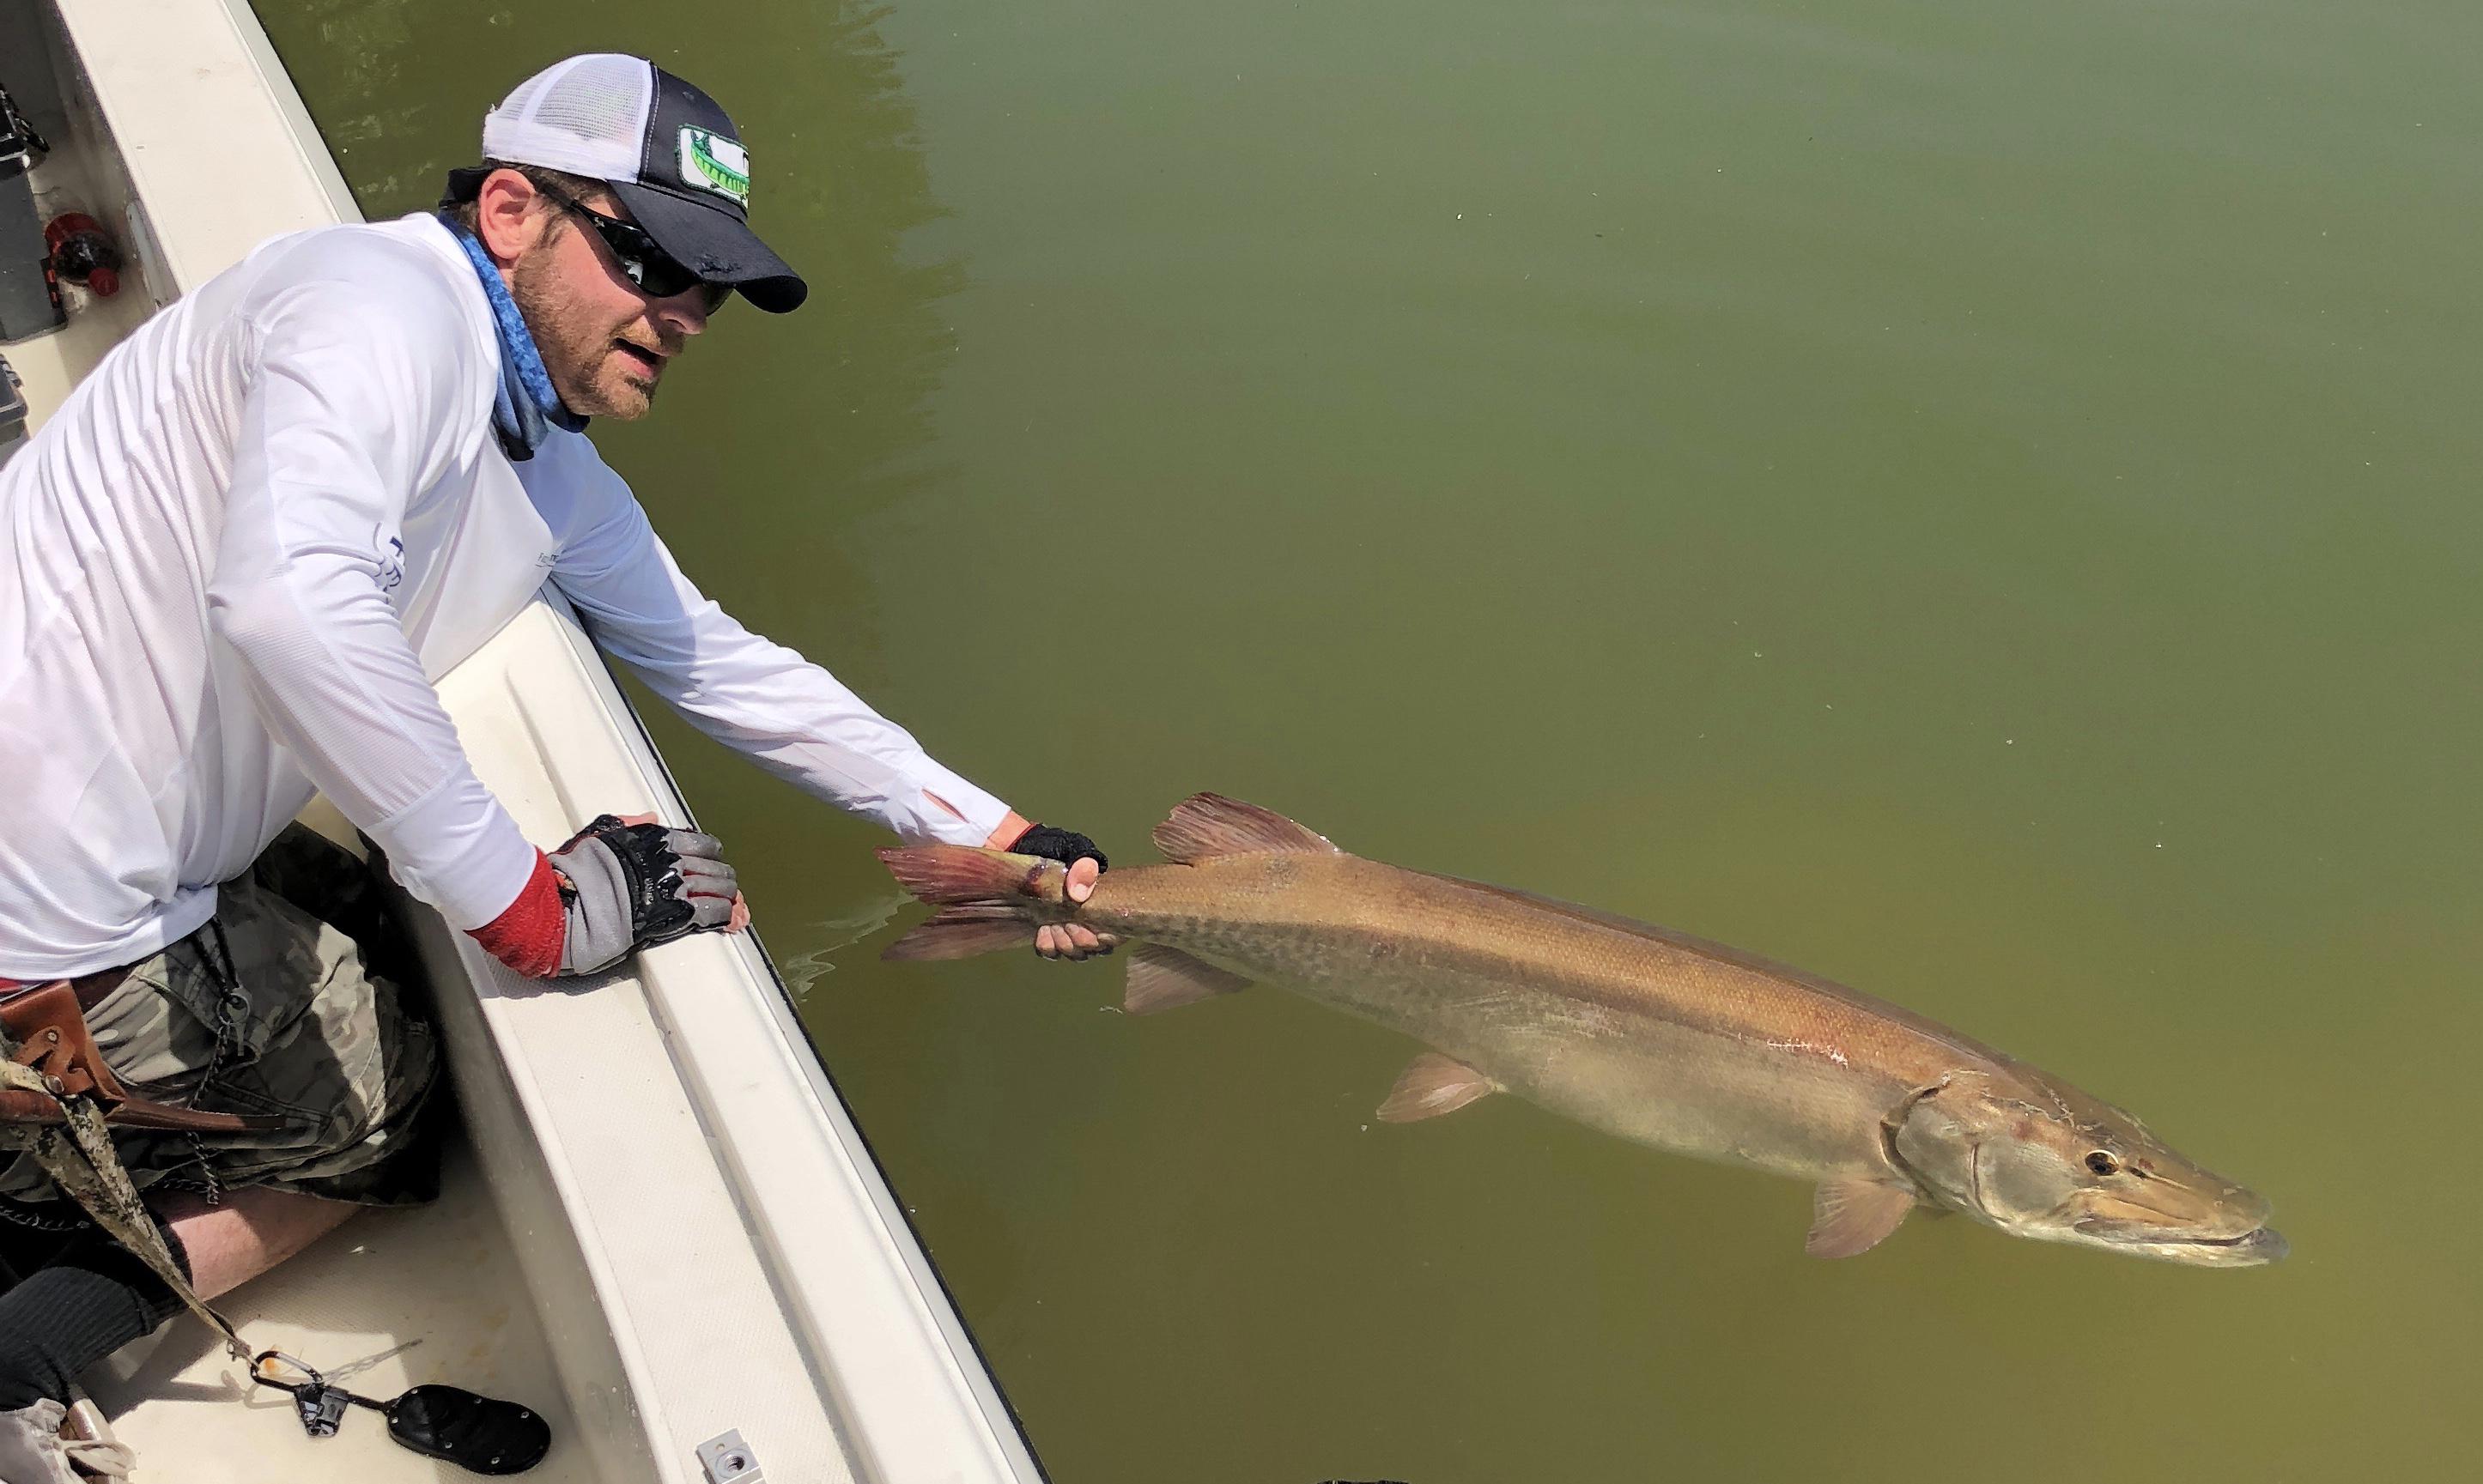 Musky Fishing Catch and Release Skils